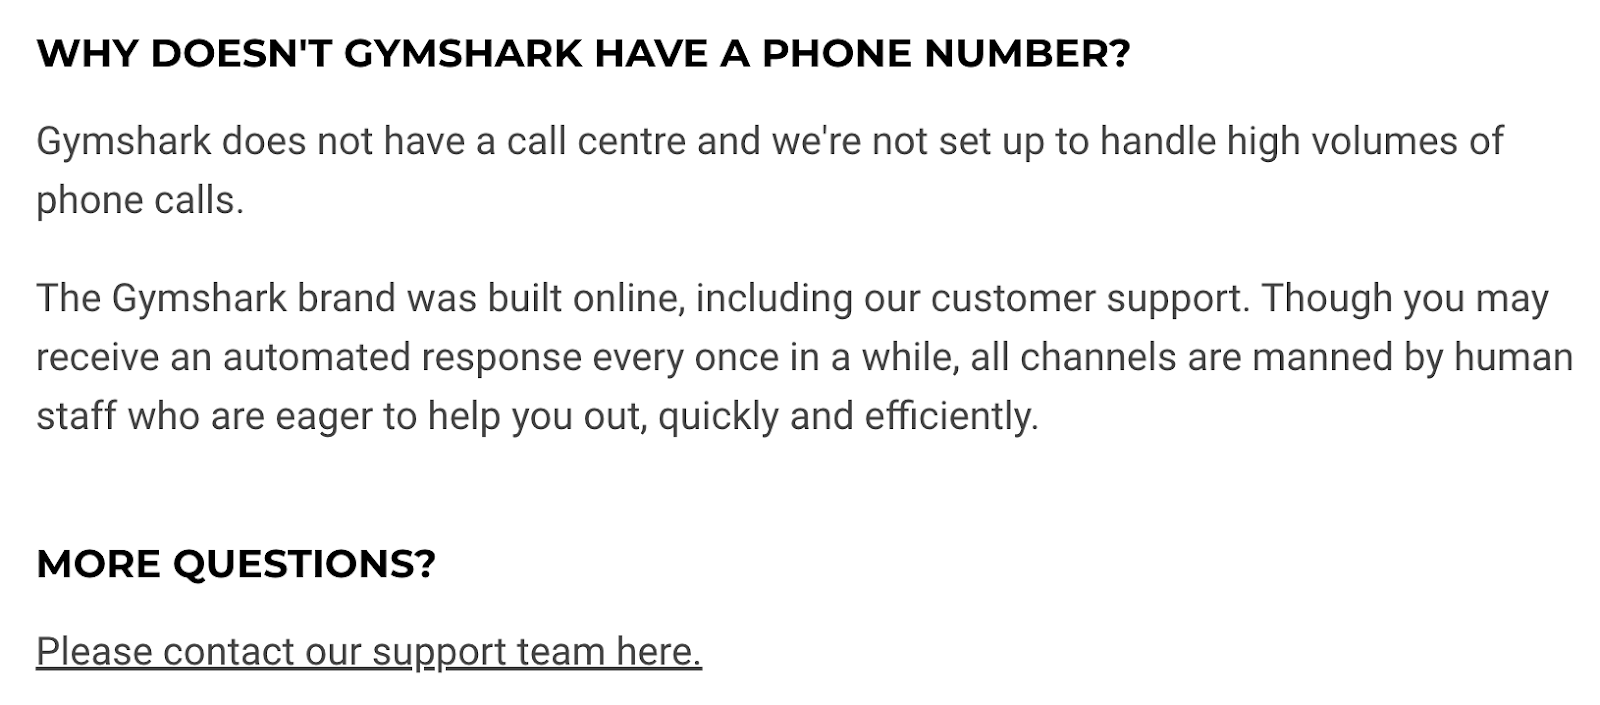 Gymshark contact team support section of the site